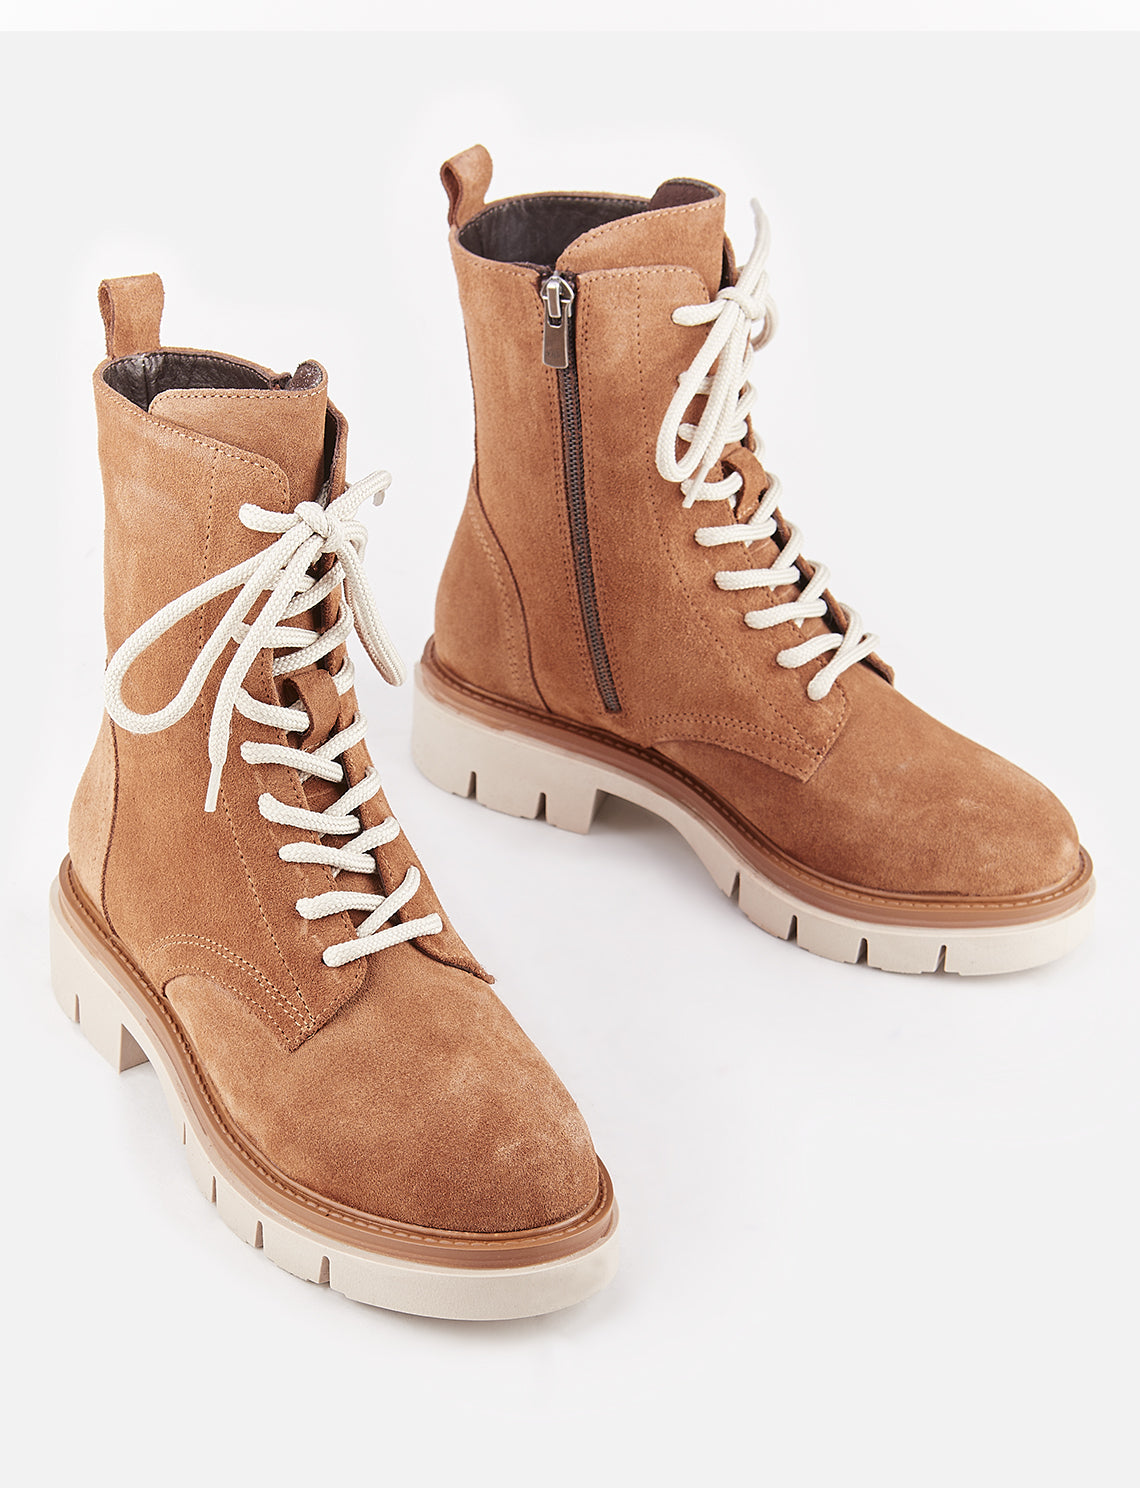 Women Tan Suede Genuine Leather Combat Boots